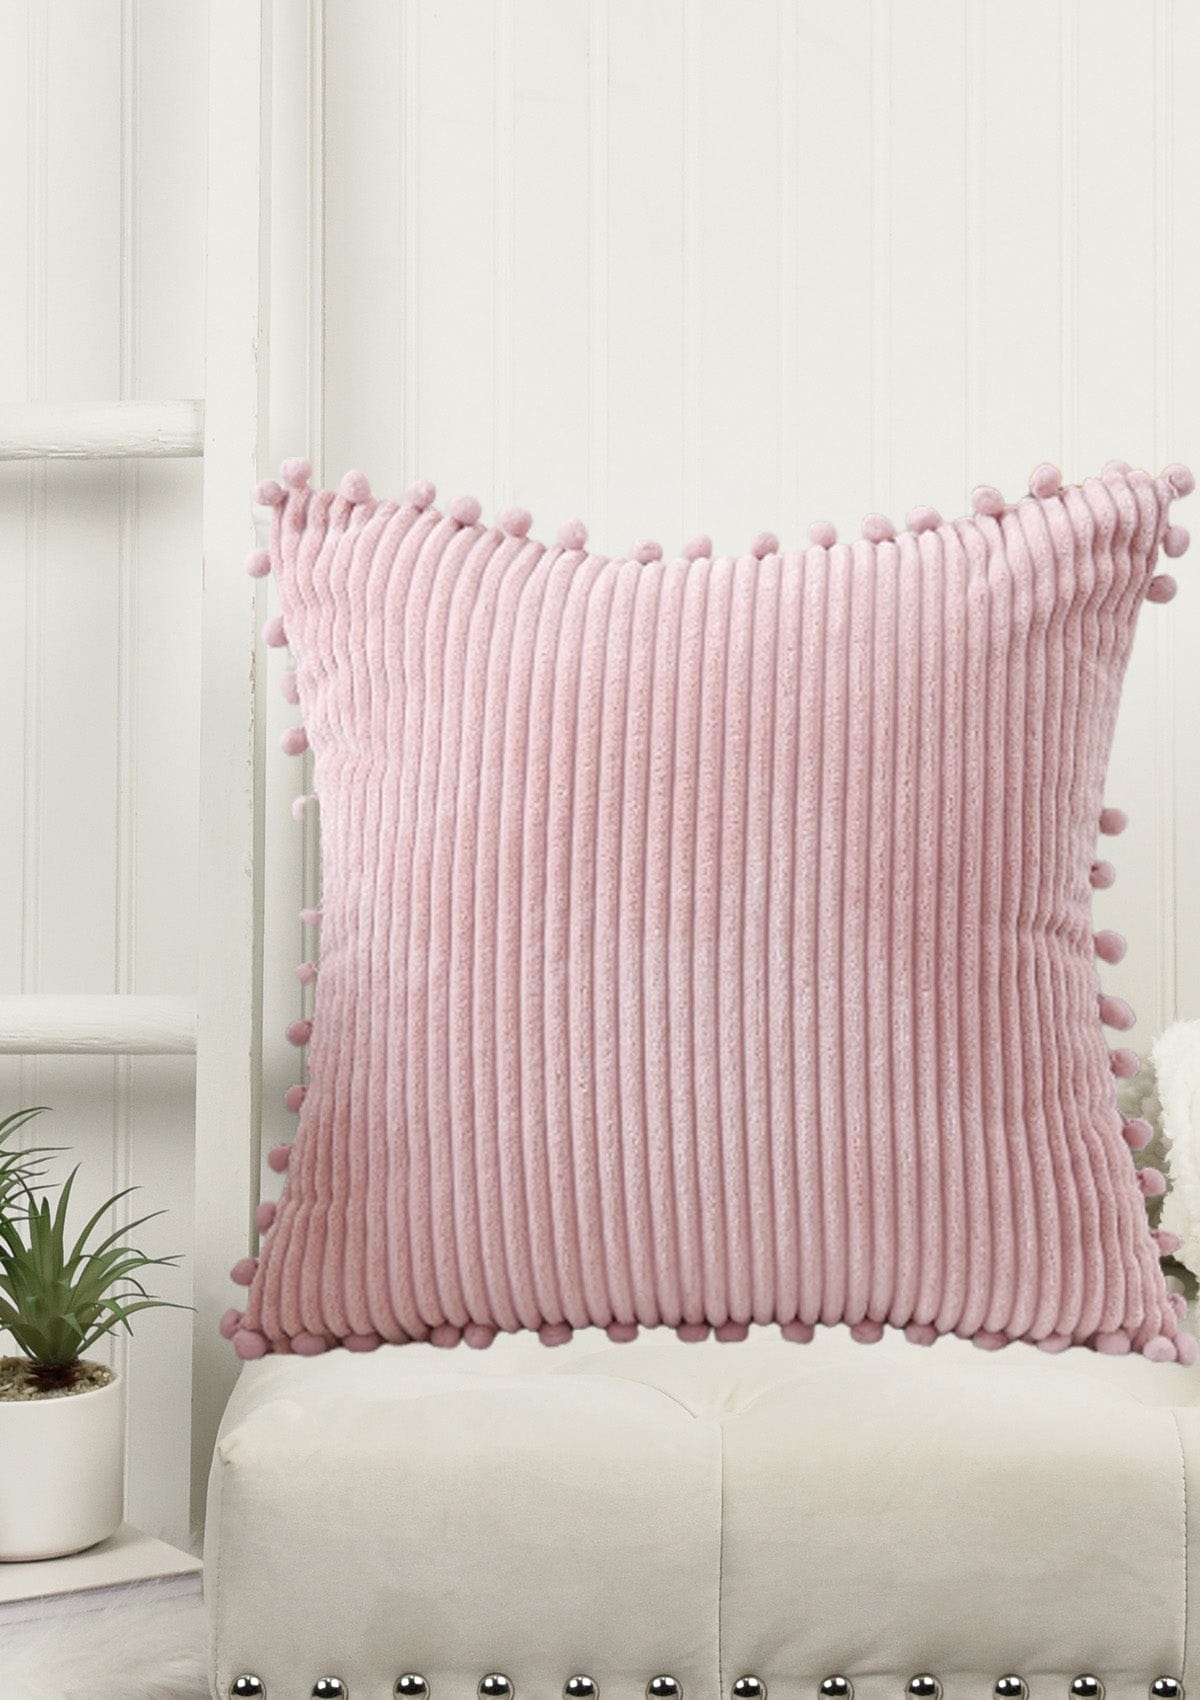 Corduroy Couch Cushion Covers 30x50cm / pink / No thanks - cover only